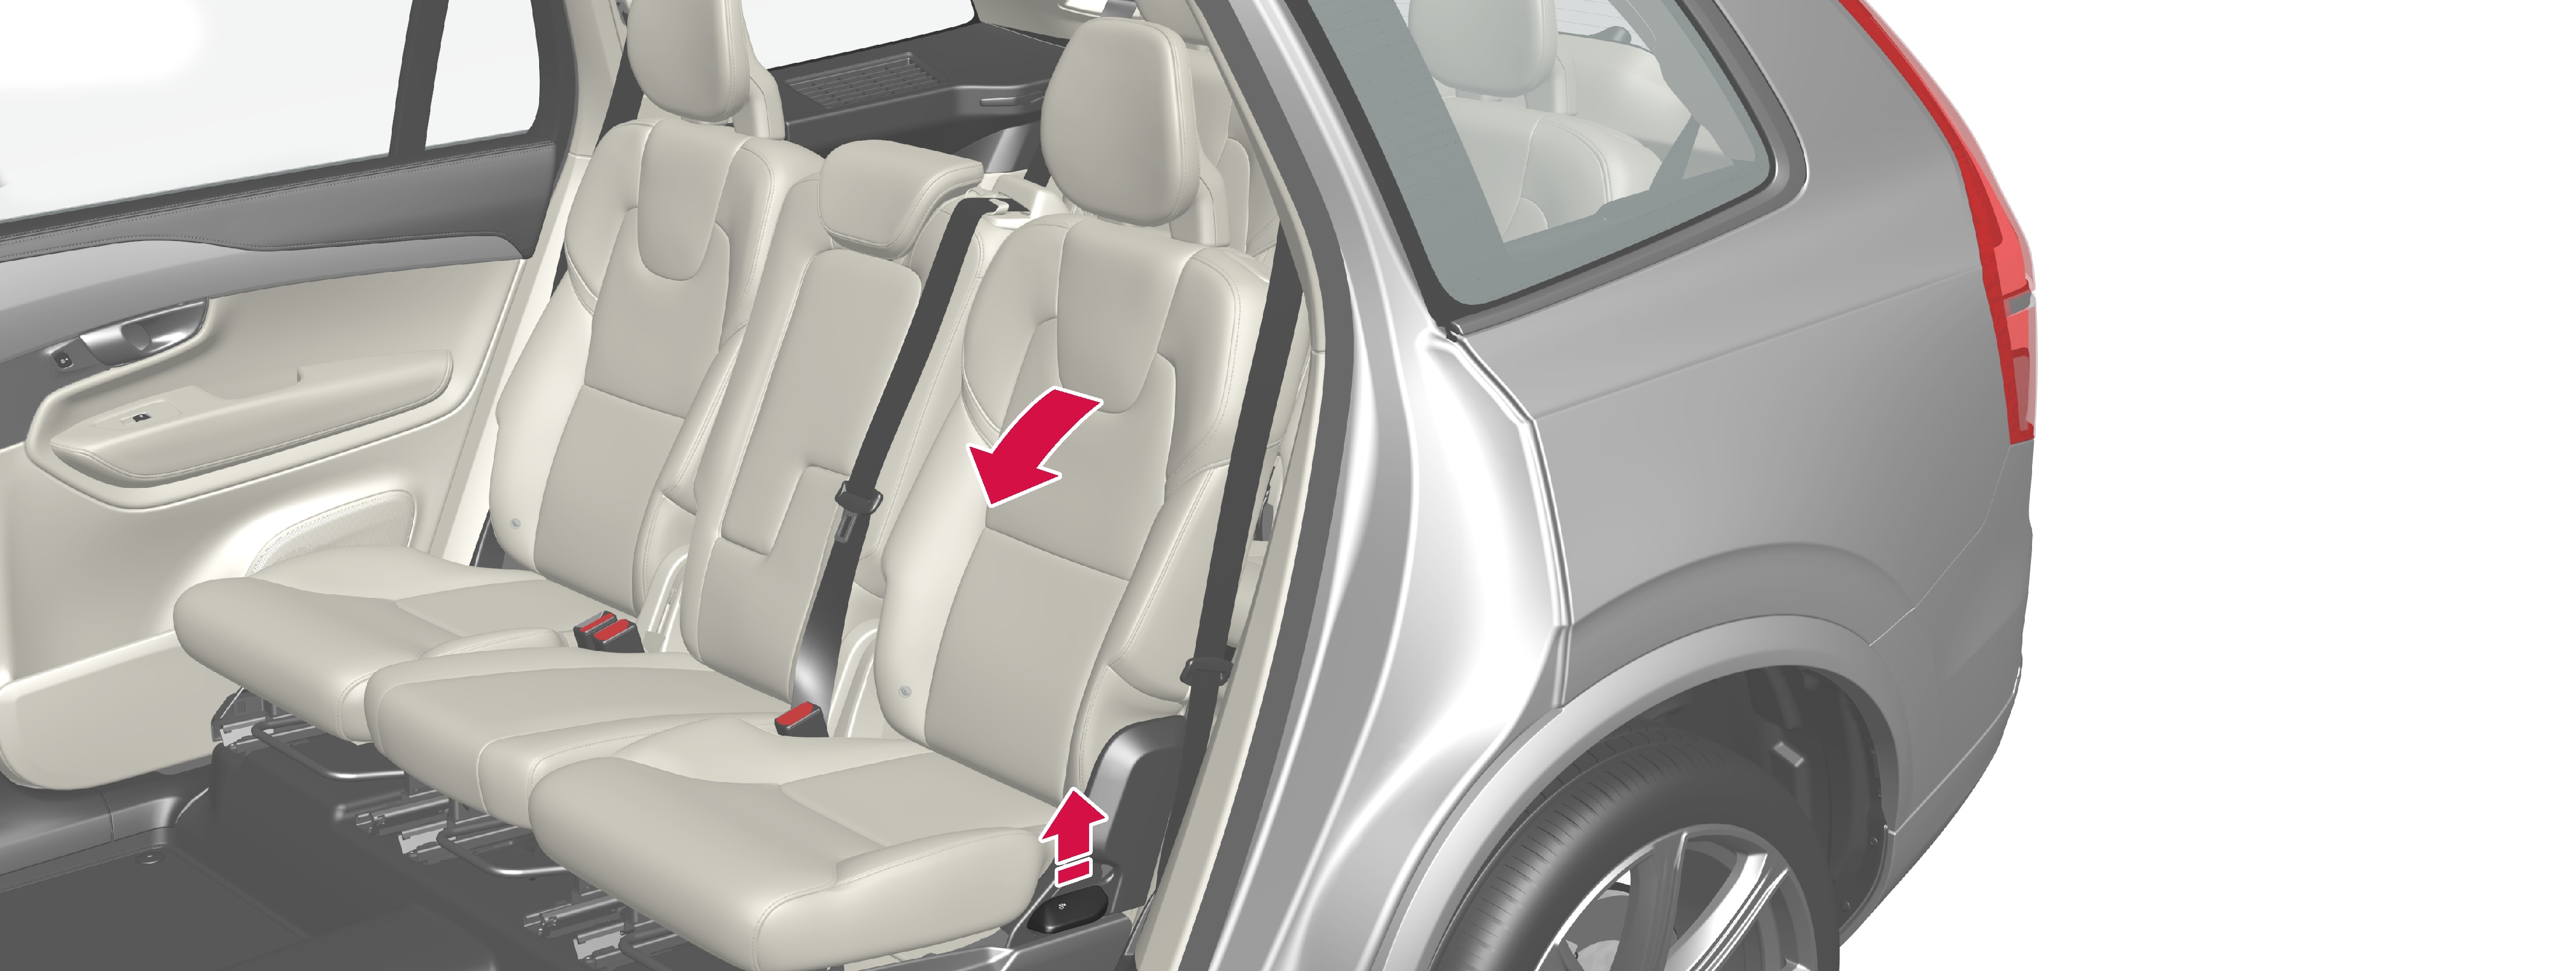 P5-1817-XC90+XC90H-2nd seat row-Folding outer seat